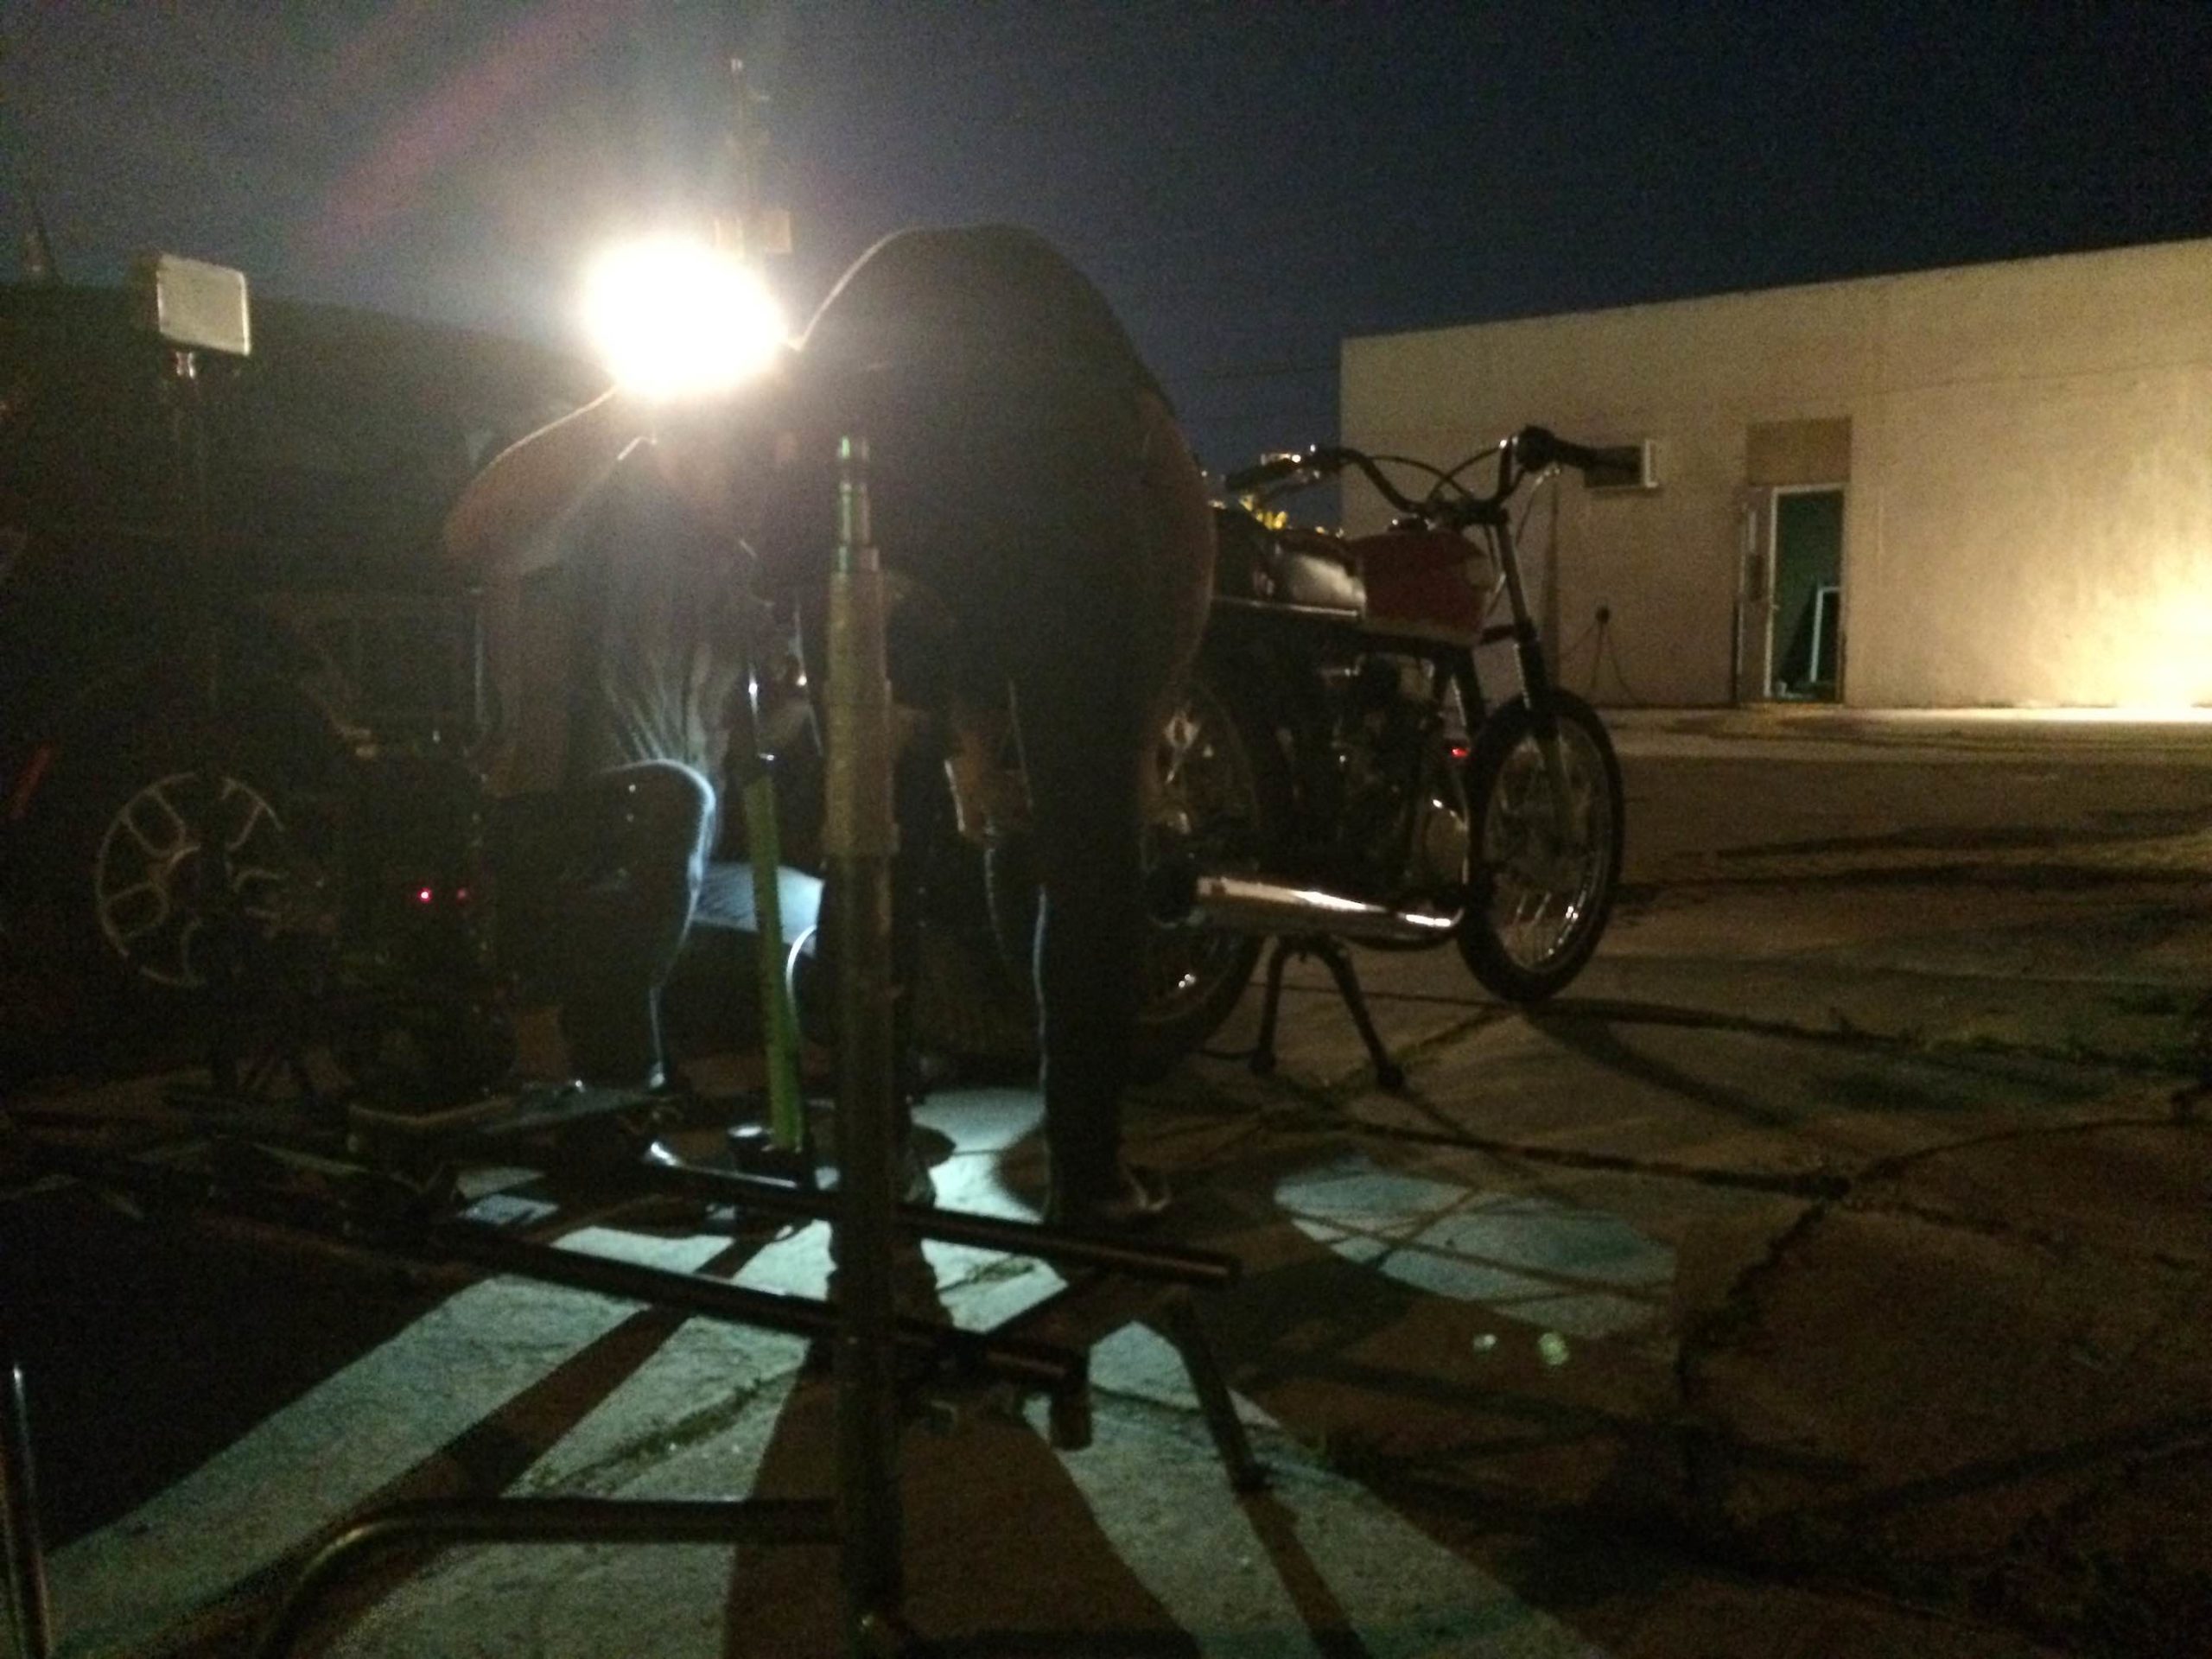 Hard Rock Energy BTS Crew members working near motorcycle in the dark with a light